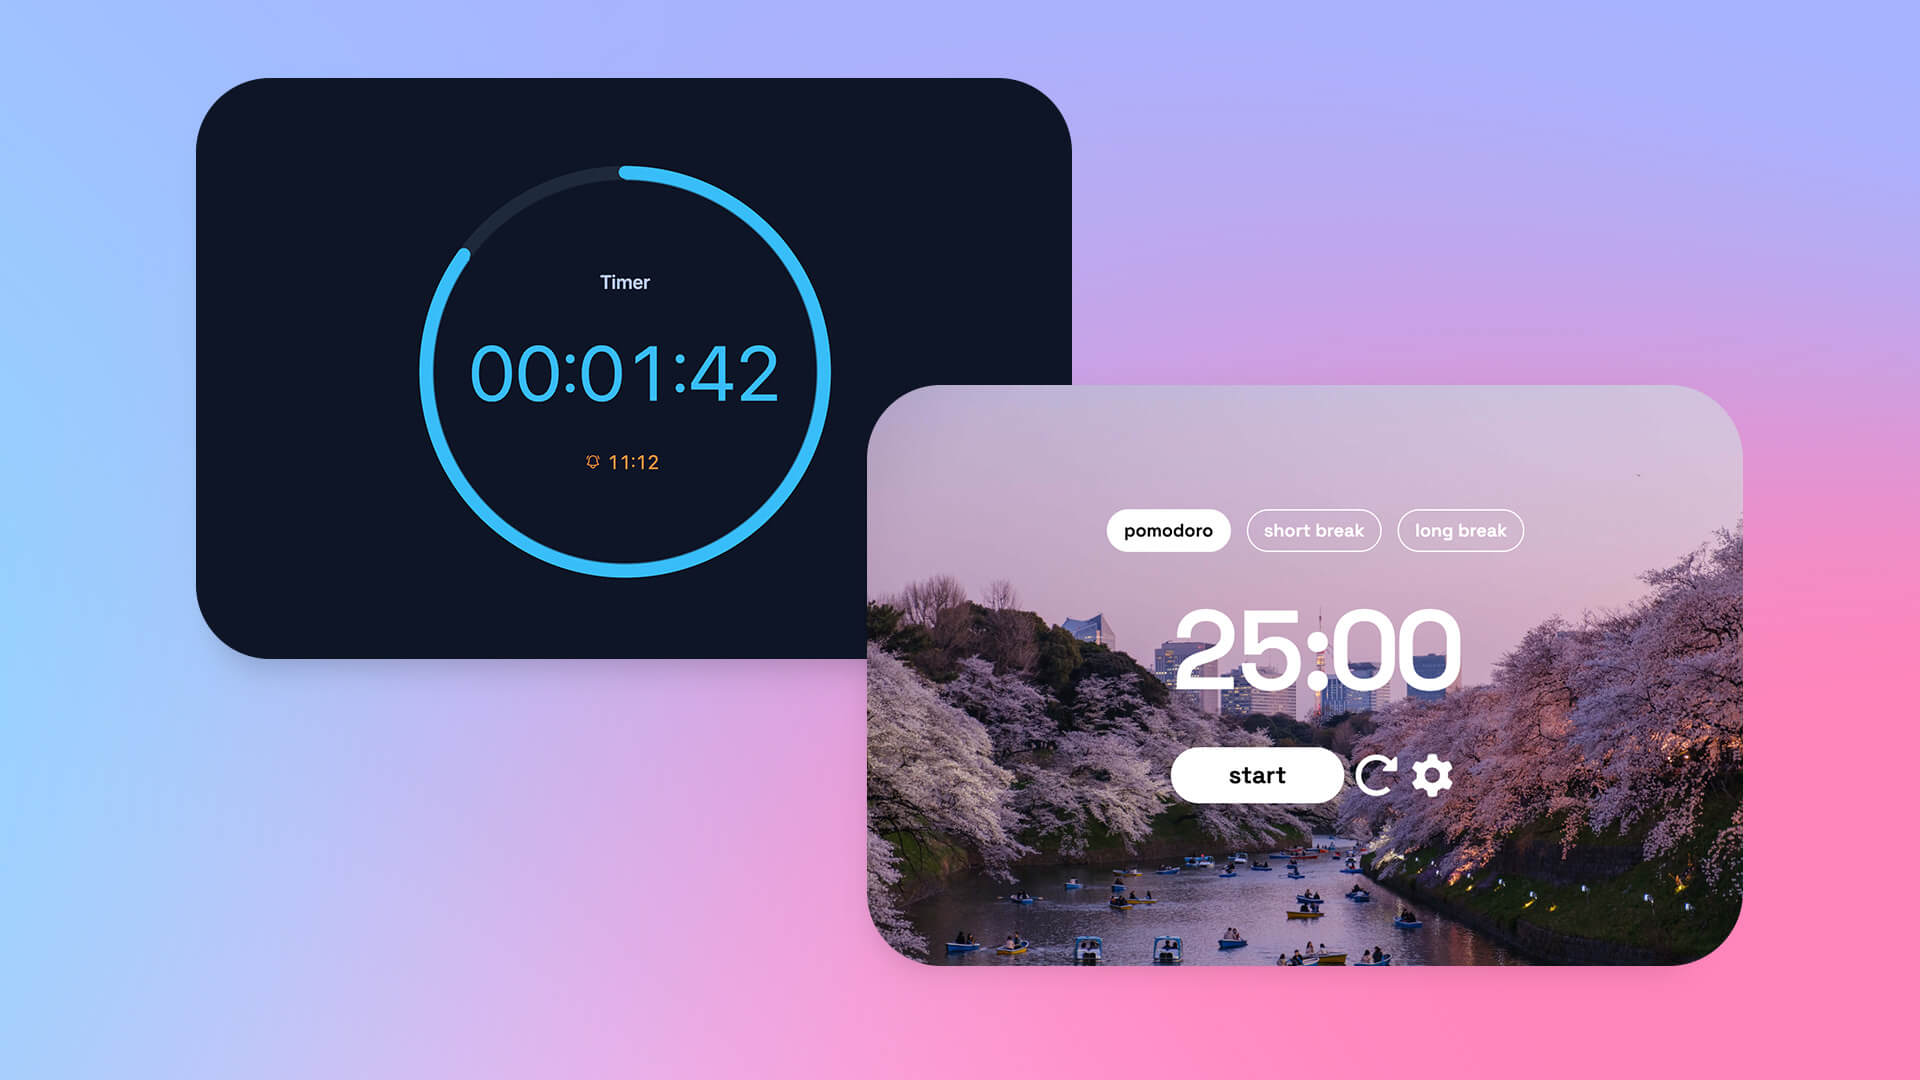 Classroom Timer, Free Countdown Timer